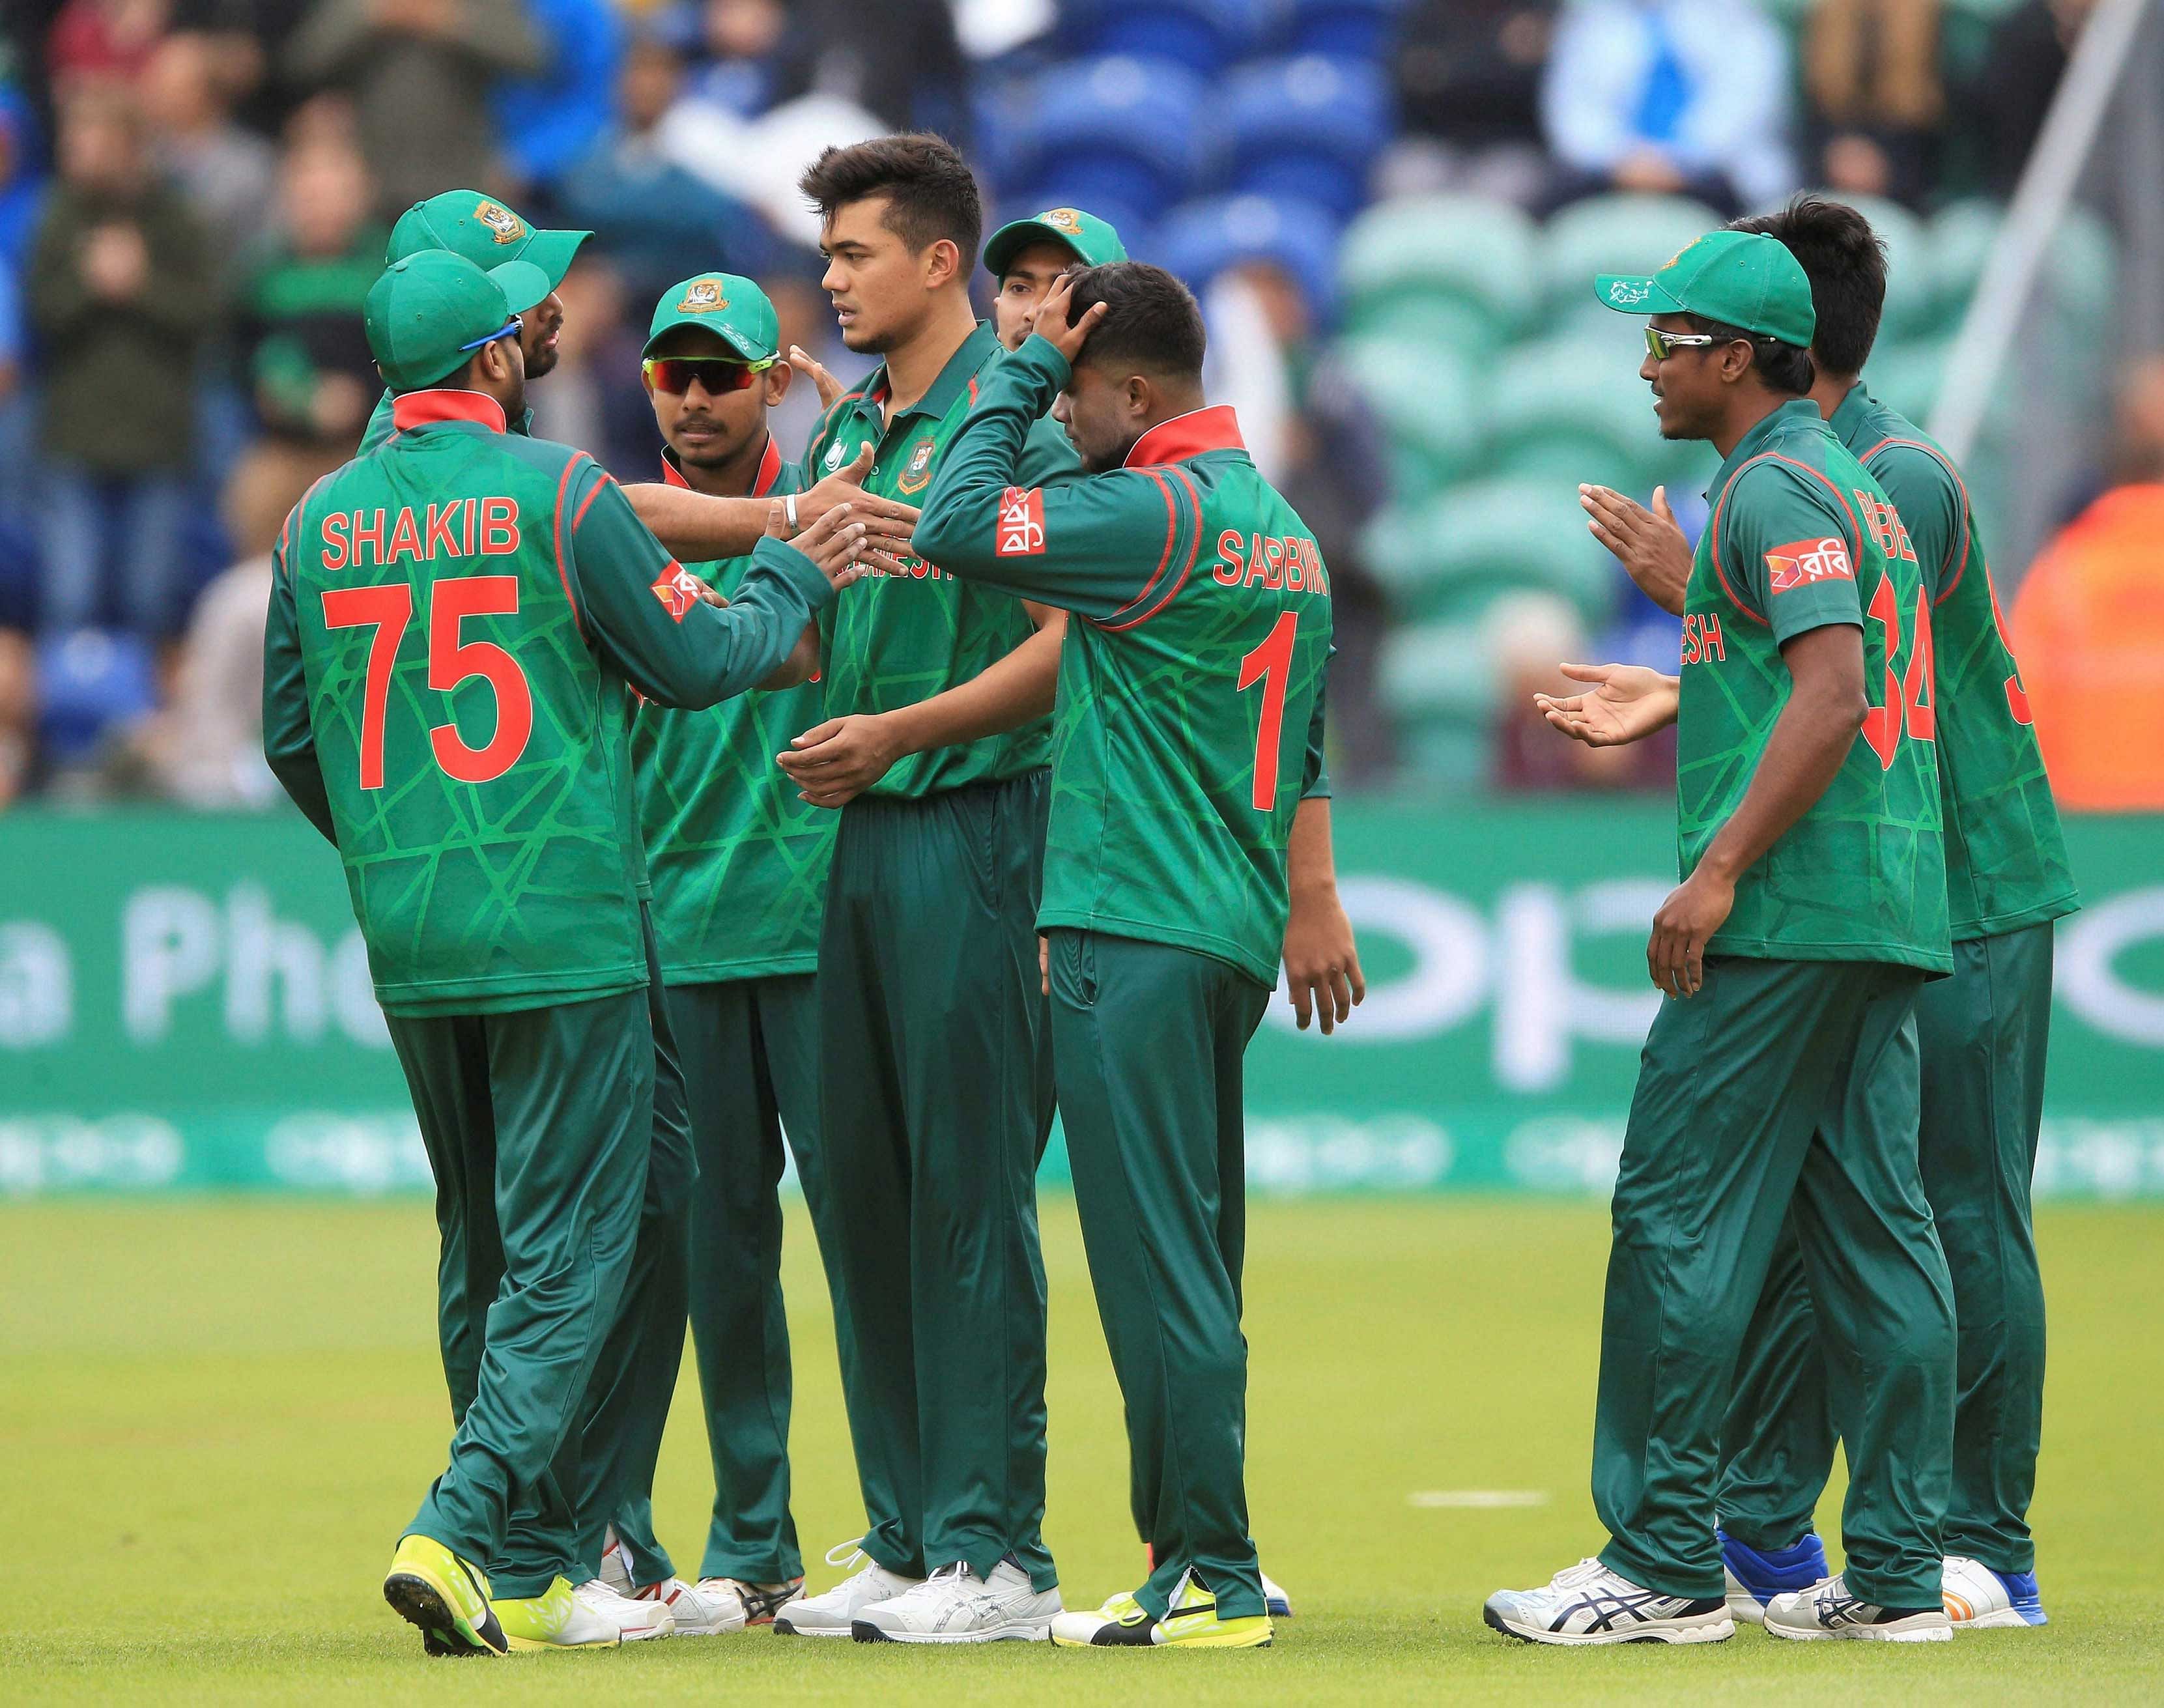 Bangladesh's Taskin Ahmed, centre, celebrates after taking the wicket of  New Zealand's Luke Ronchi during the ICC Champions Trophy, Group A  cricket match between New Zealand and Bangladesh, at Sophia Gardens,  Cardiff, Wales, Friday June 9, 2017